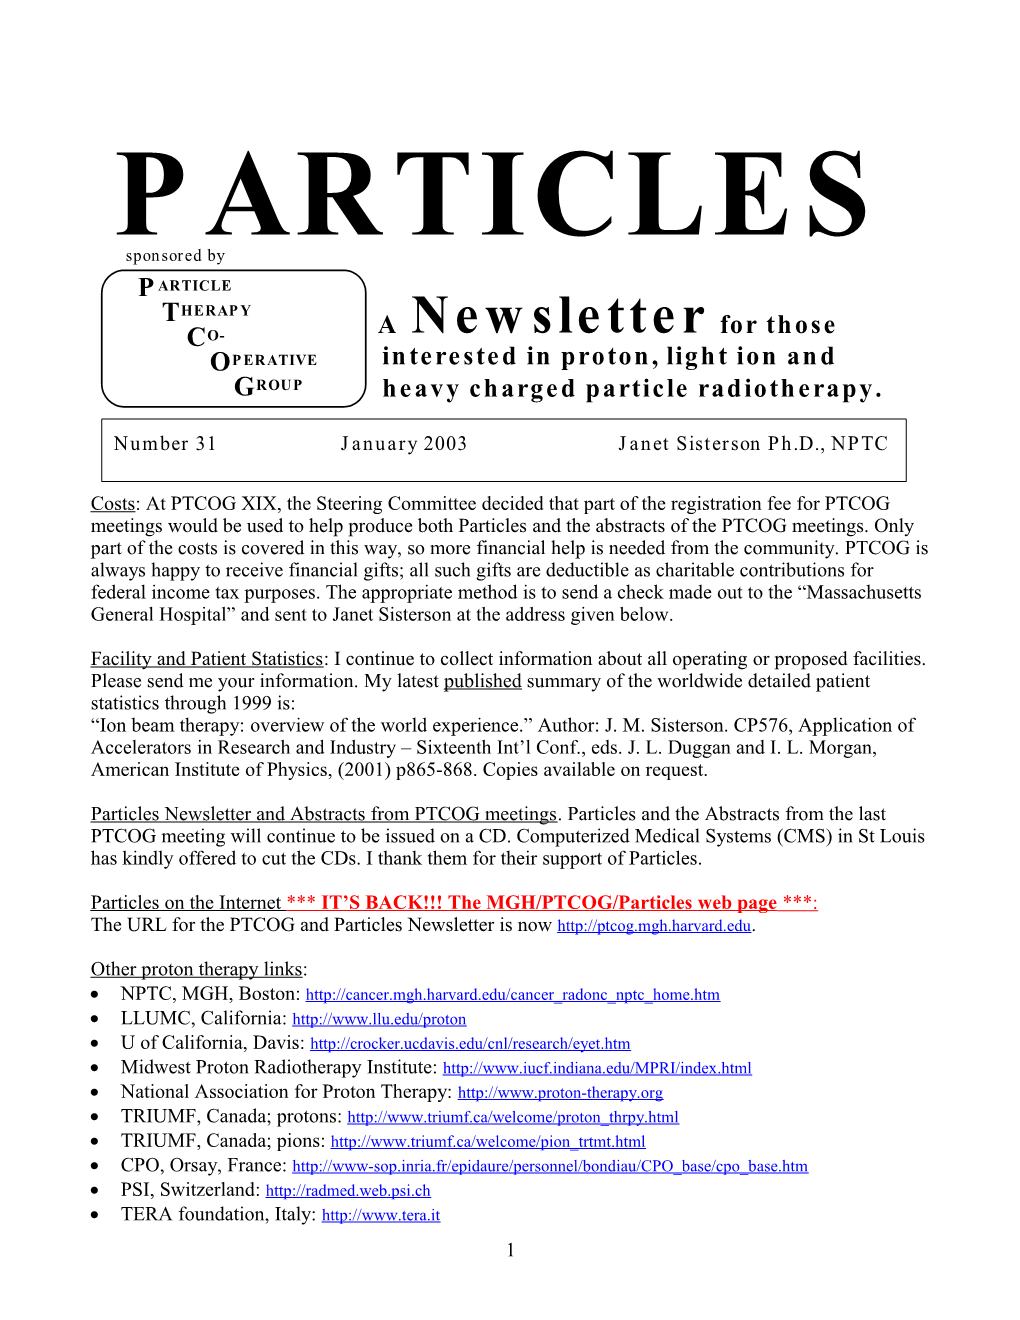 Particles on the Internet IT S BACK the MGH/PTCOG/Particles Web Page